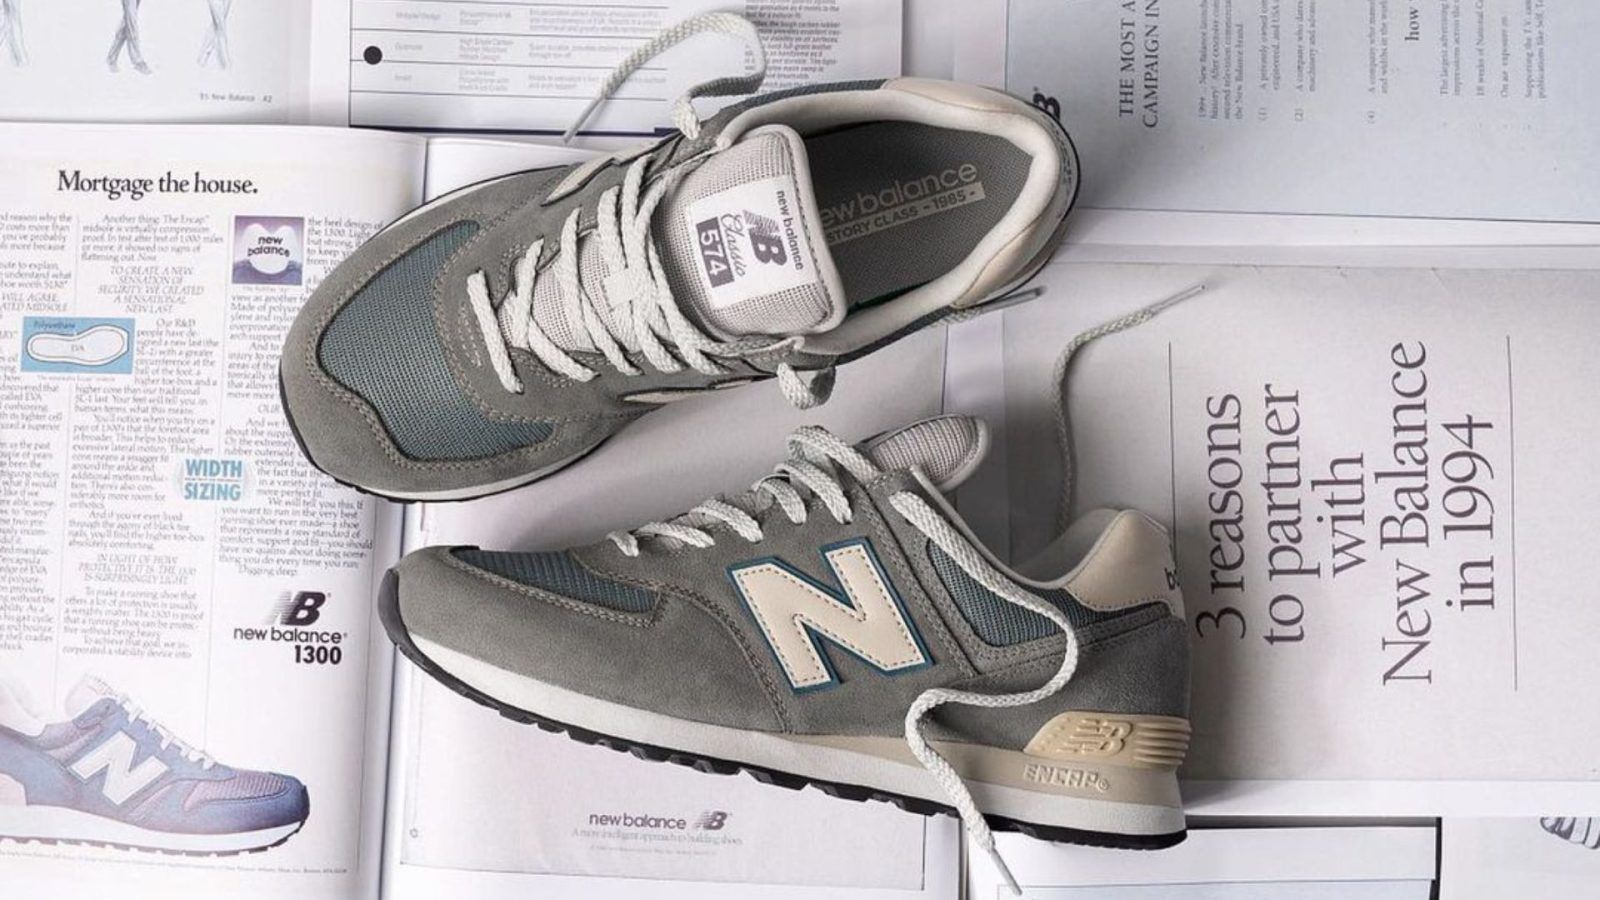 iconic New Balance sneakers that live up to the hype